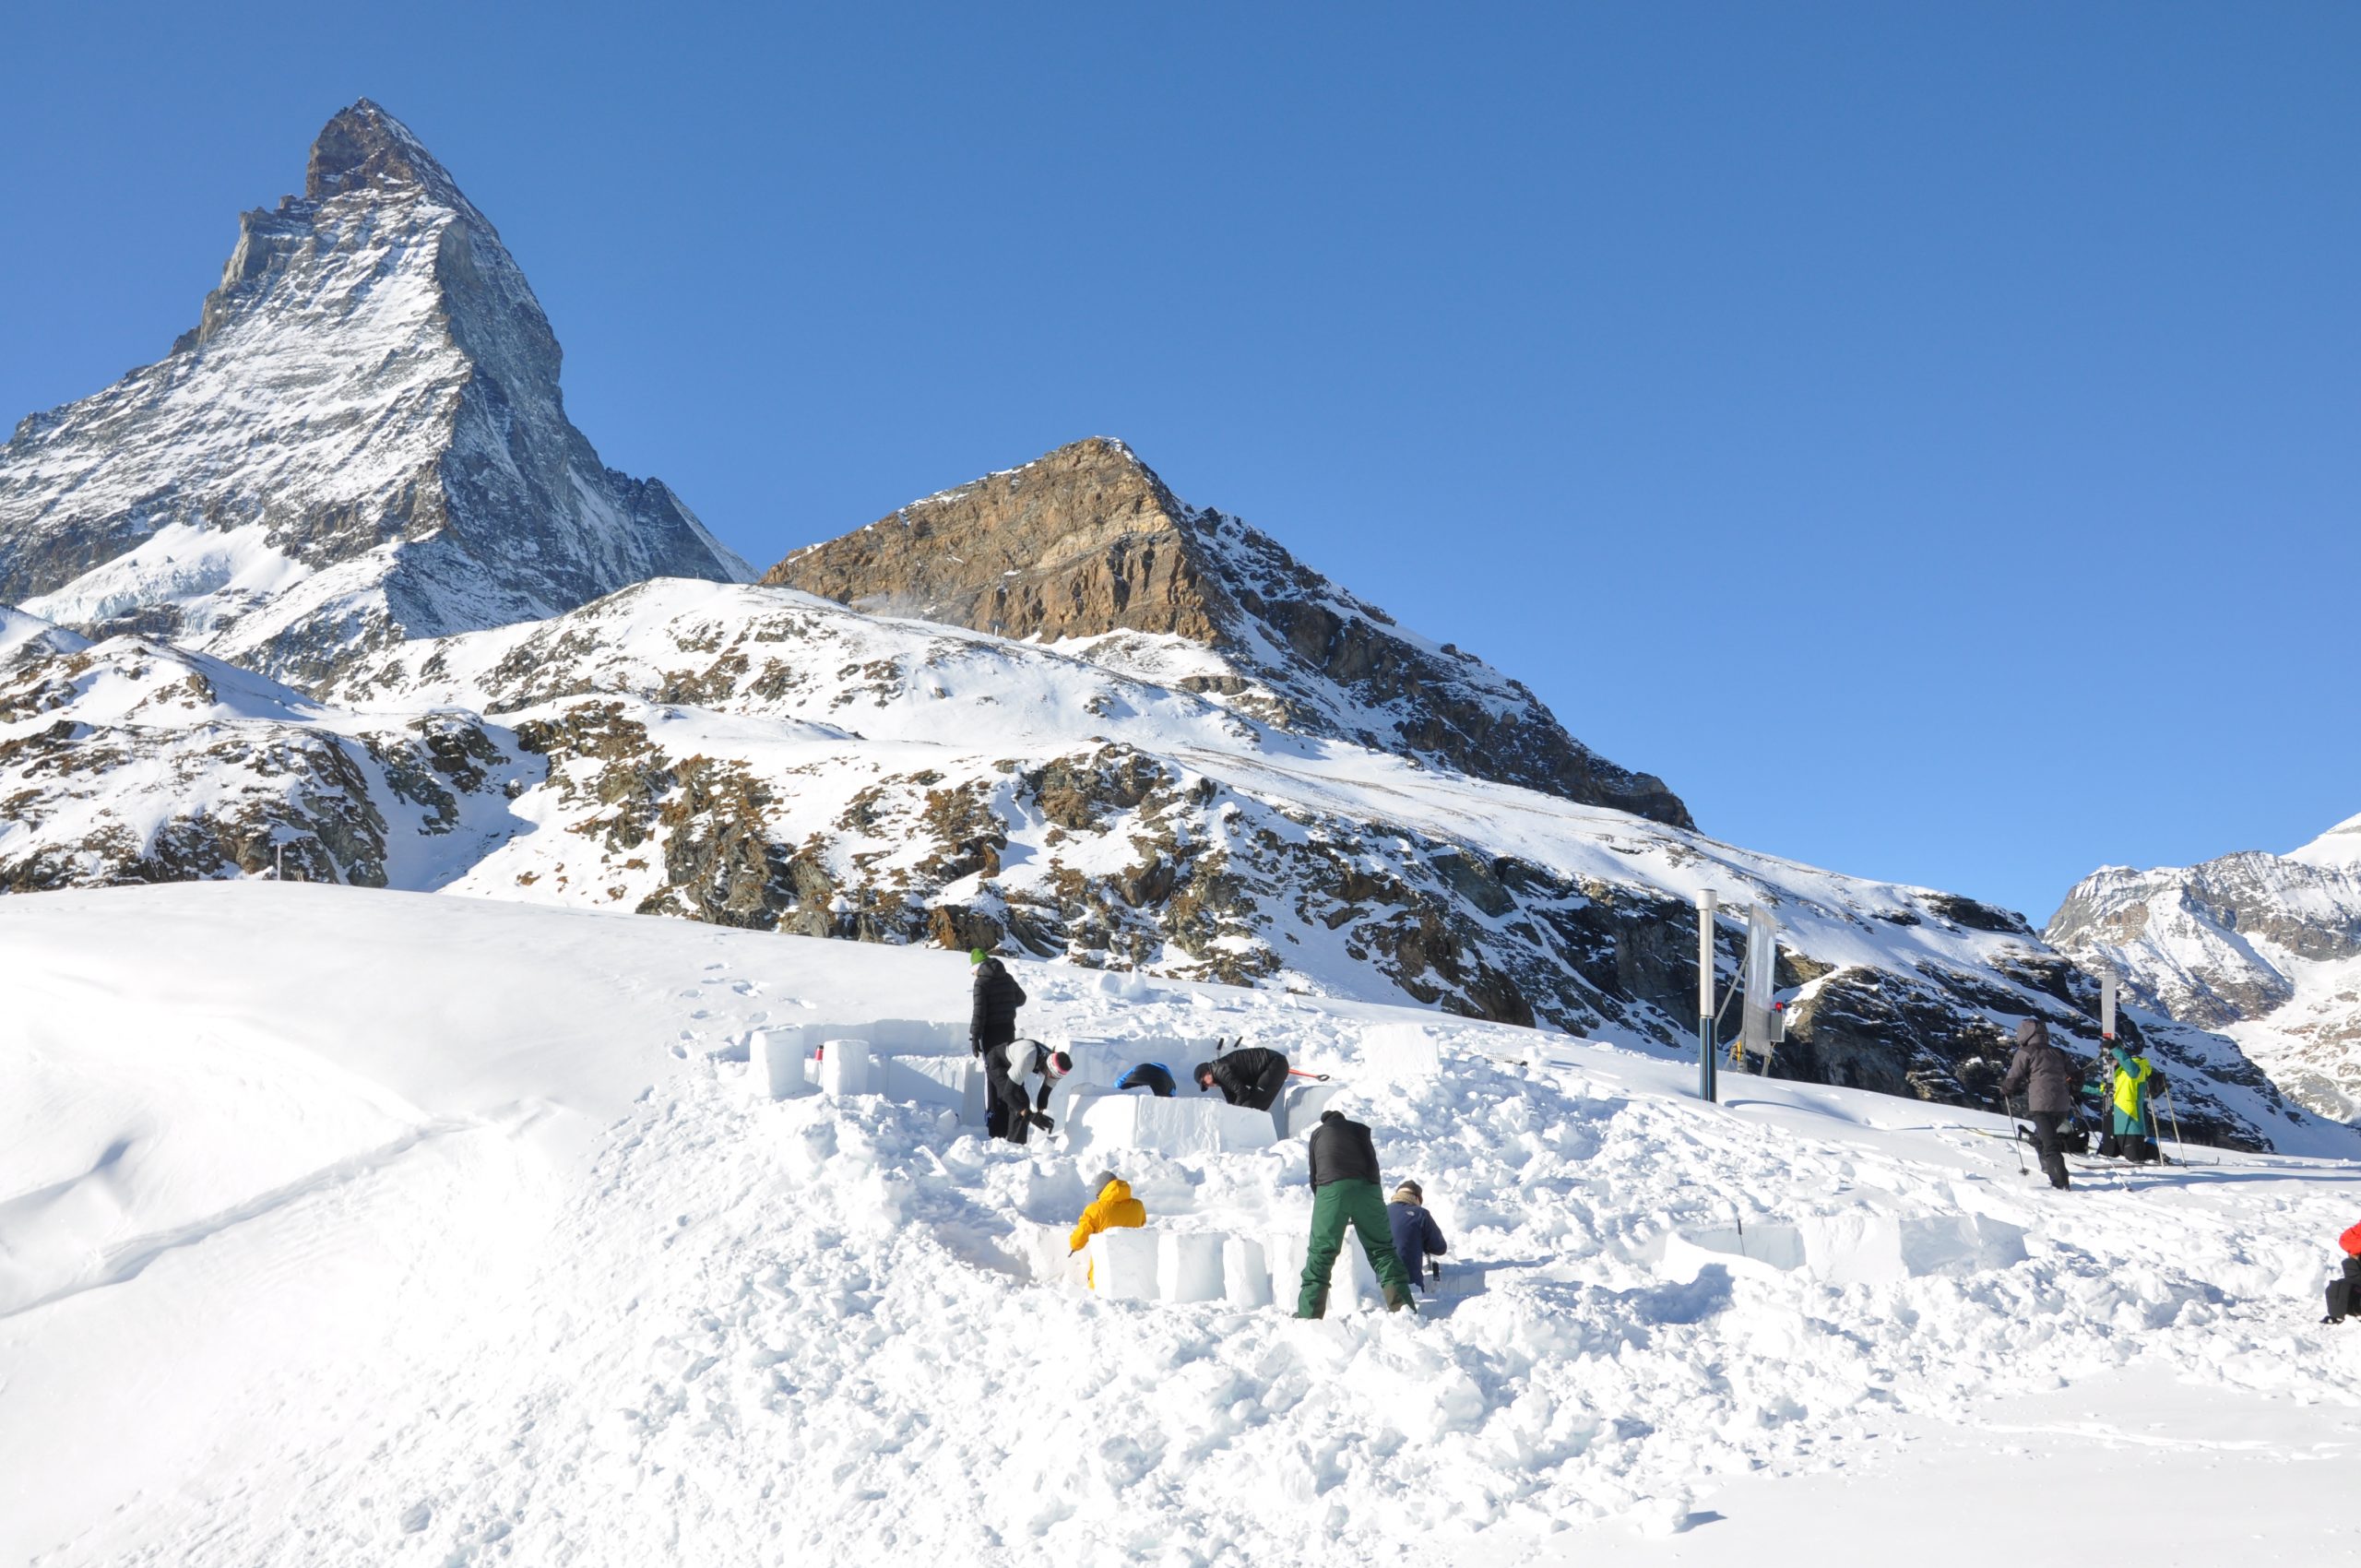 Igloo building with guests on a luxury catered holiday in Zermatt. The Matterhorn can be seen in the background.